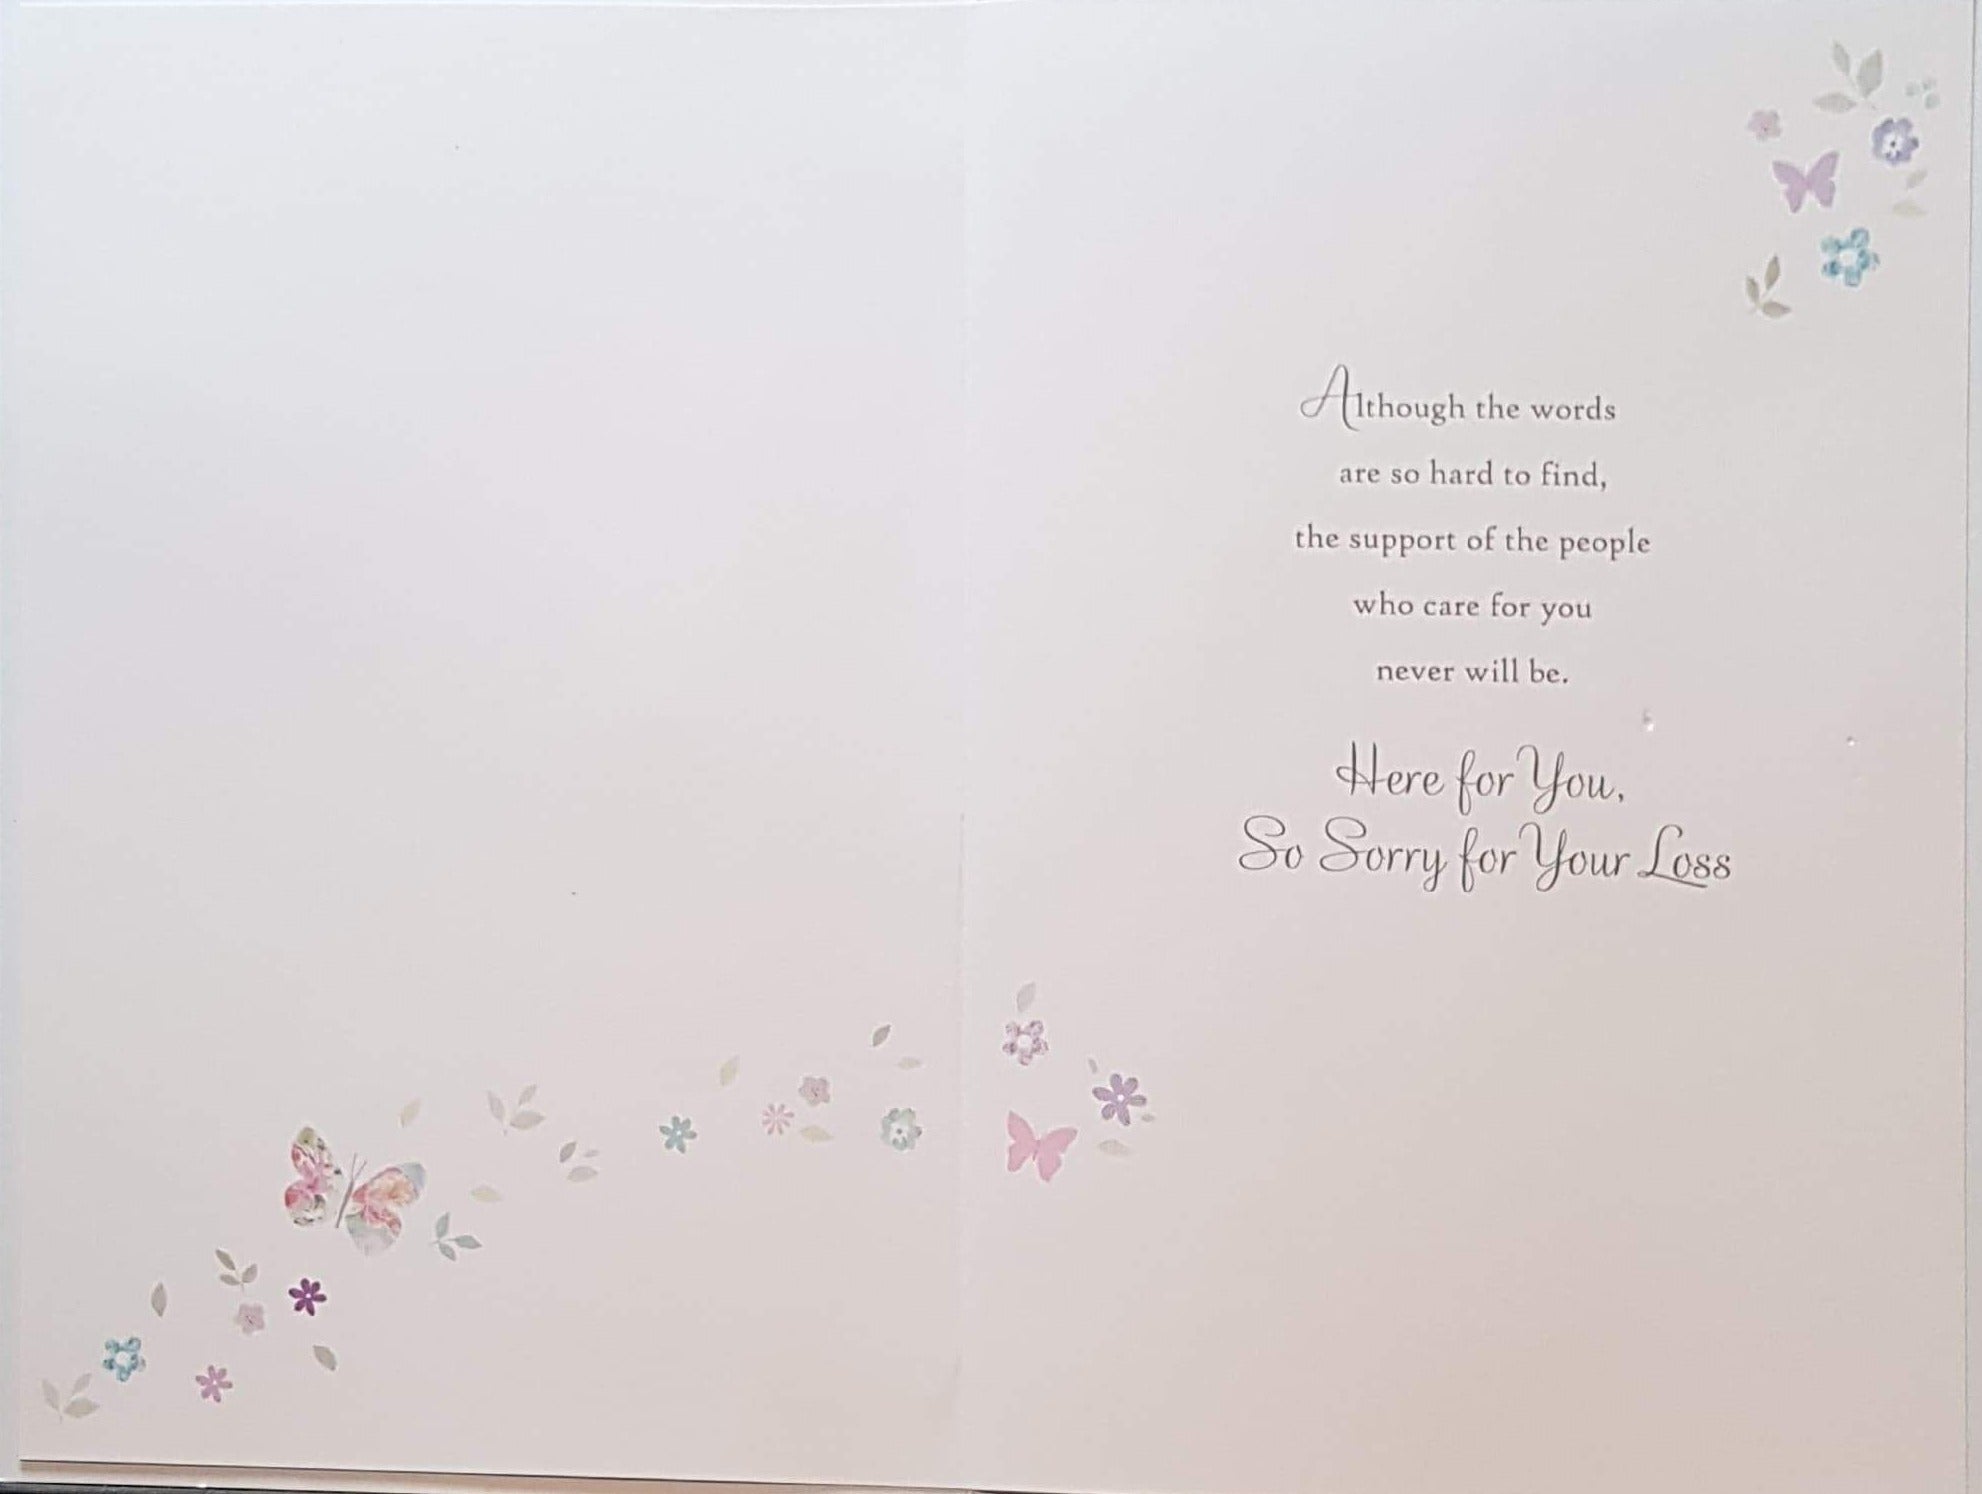 Sympathy Card - Daughter / Floral & Silver Leaves & A Butterfly